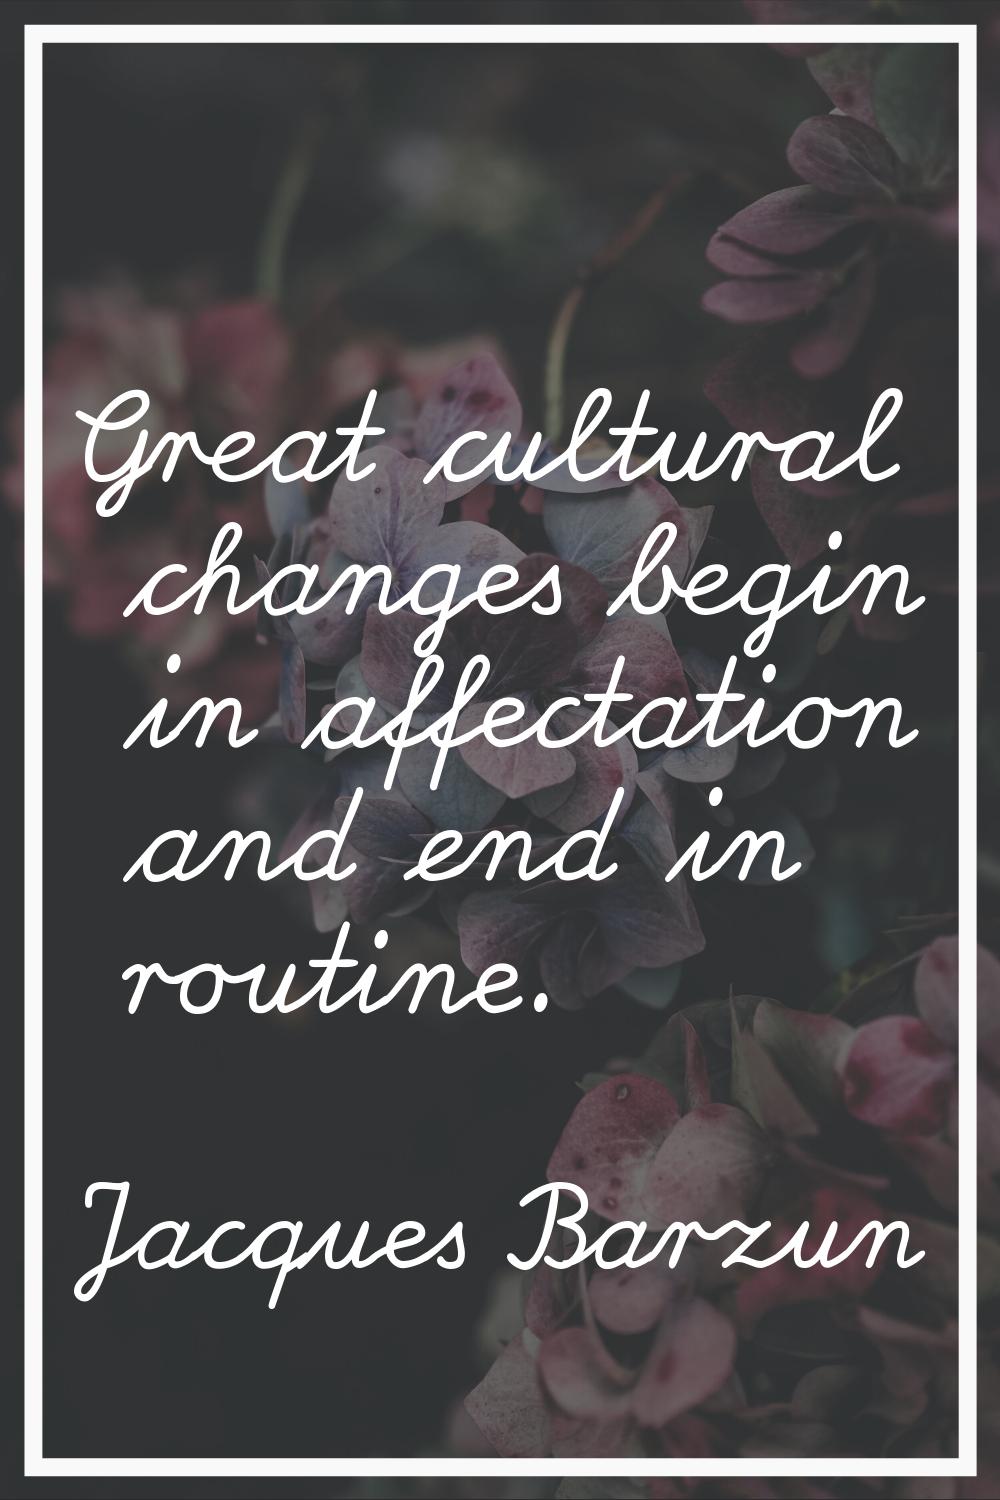 Great cultural changes begin in affectation and end in routine.